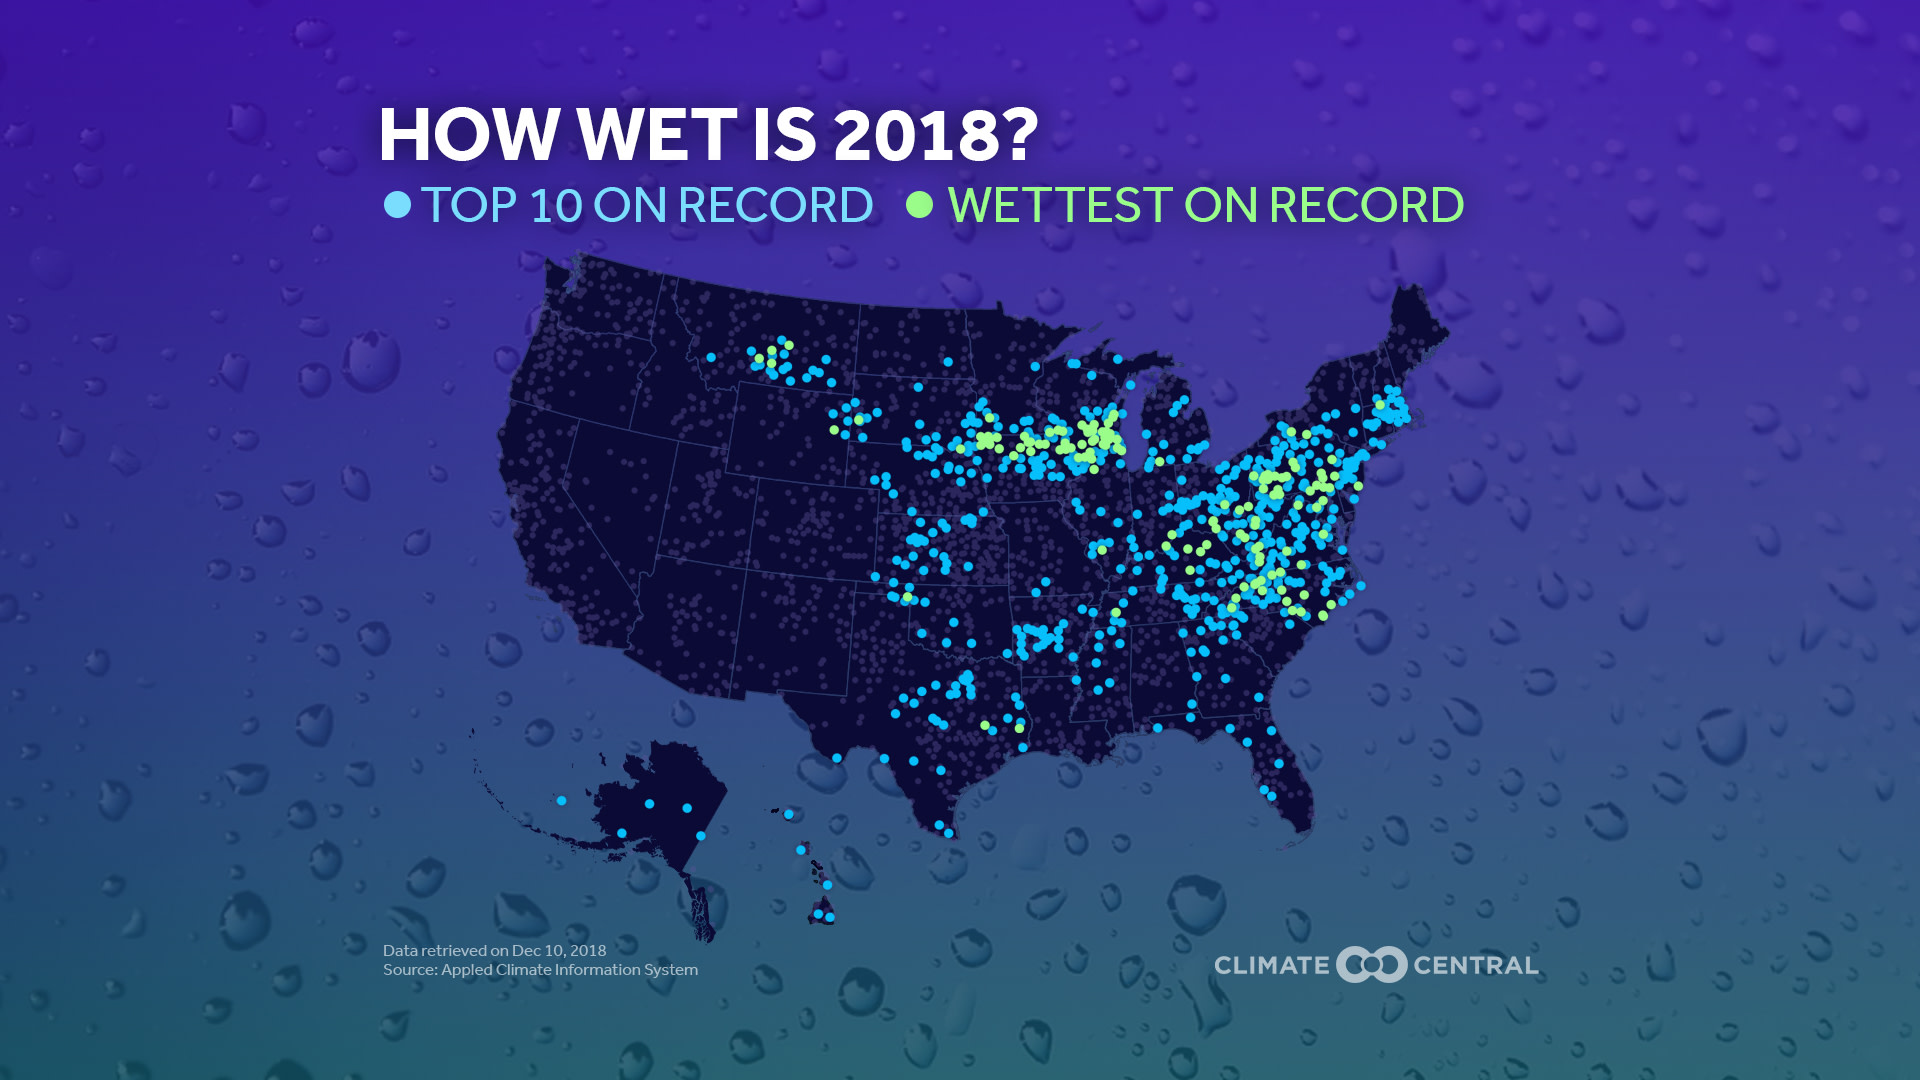 Rainfall Records of 2018